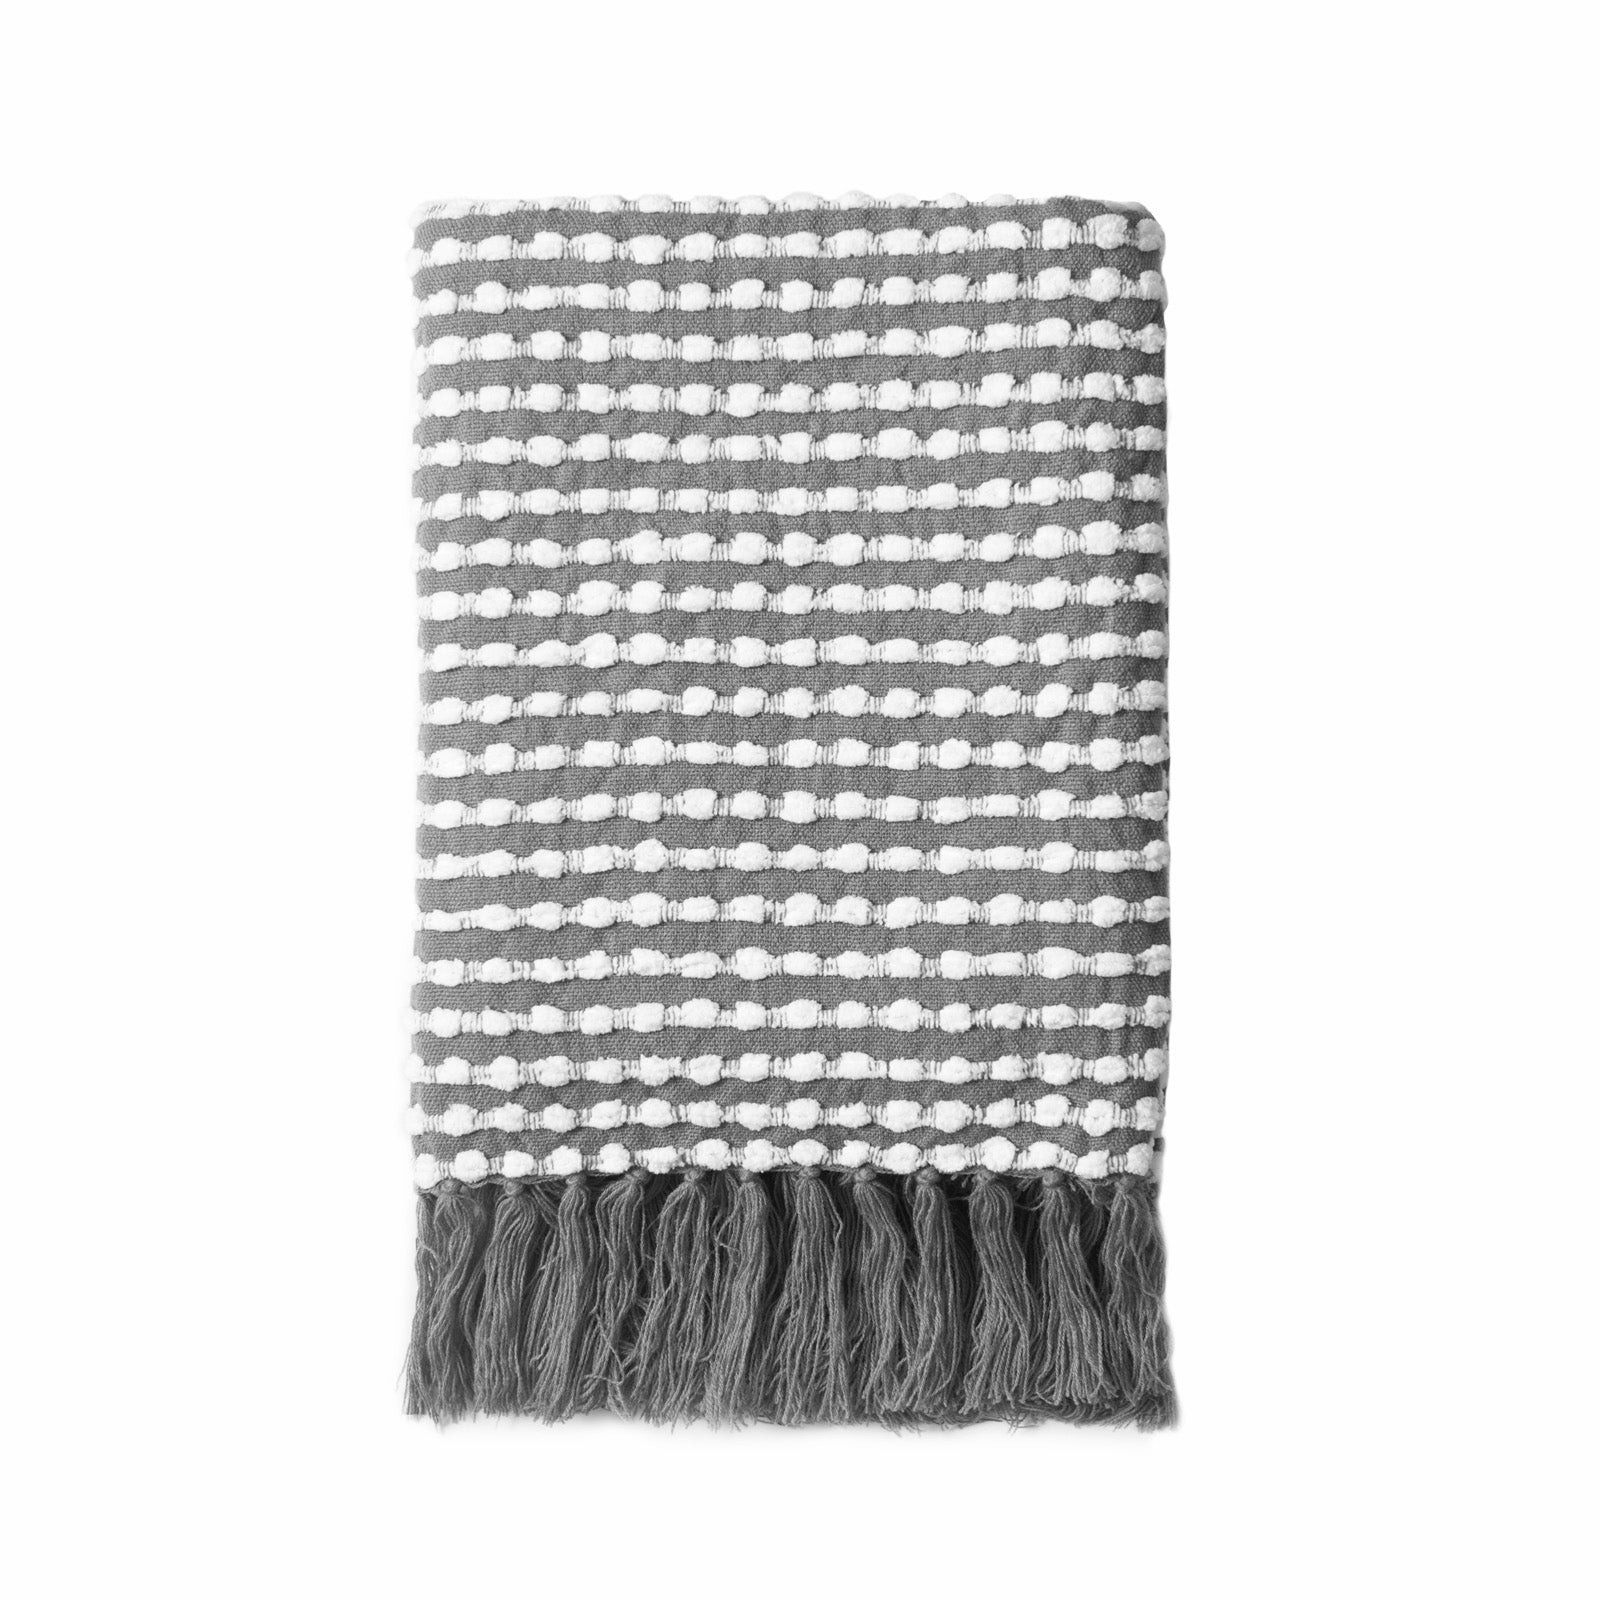 Modern Decorative Throw Blanket with Fringes, Dark Gray and White, 50"x60"